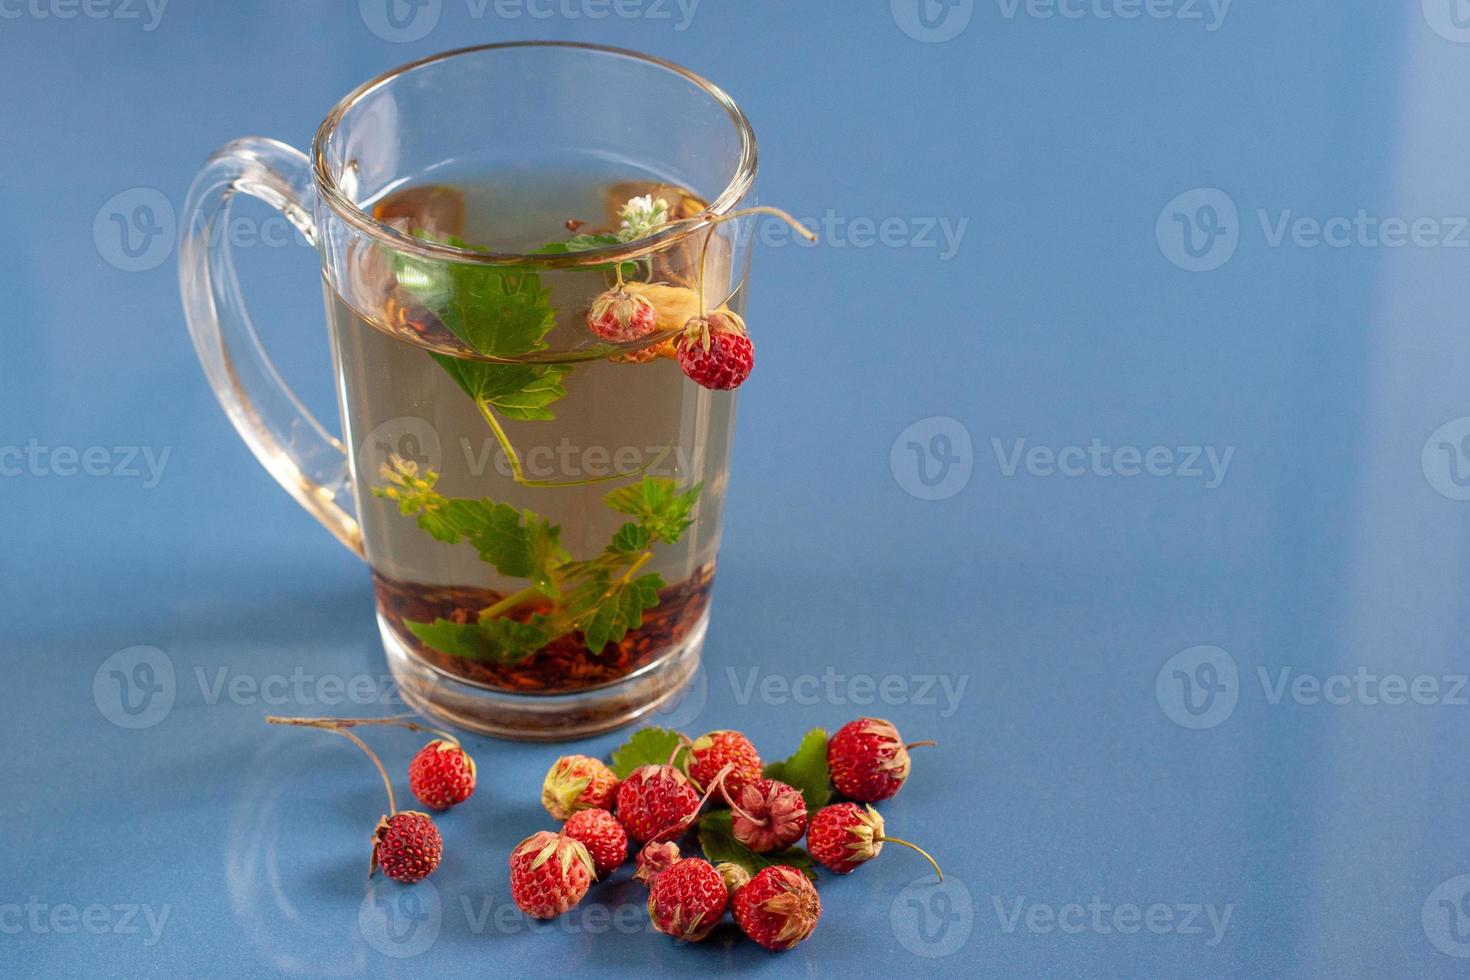 Still life of a mug of herbal tea on blue ceramic tiles with dust texture and reflection. Near scattered strawberries. With space for text. photo